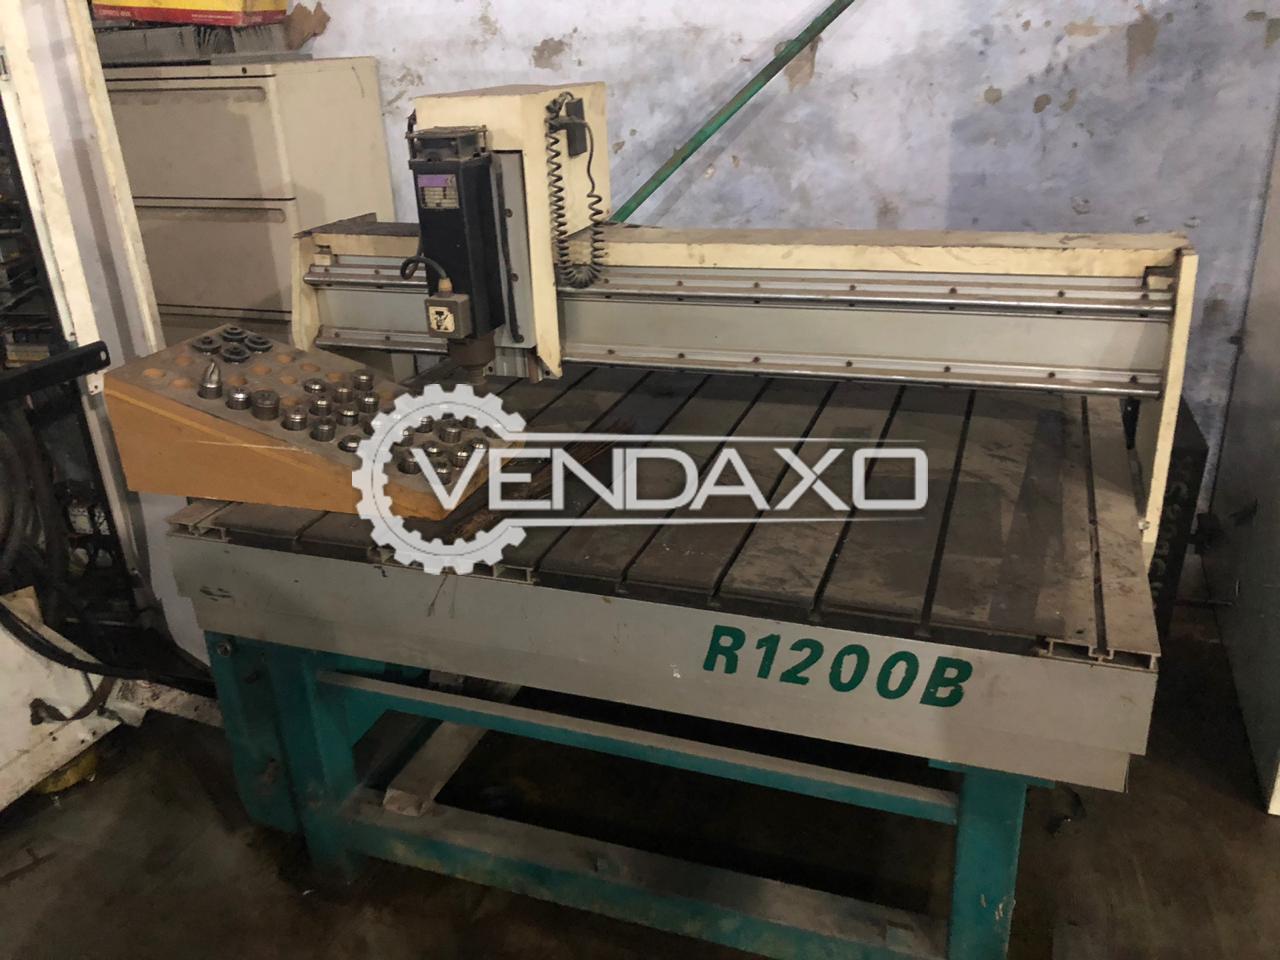 Used Jai J3400 In Wood Spindle Moulder Machine Motor Power 5 Hp For Sale At Best Prices Vendaxo